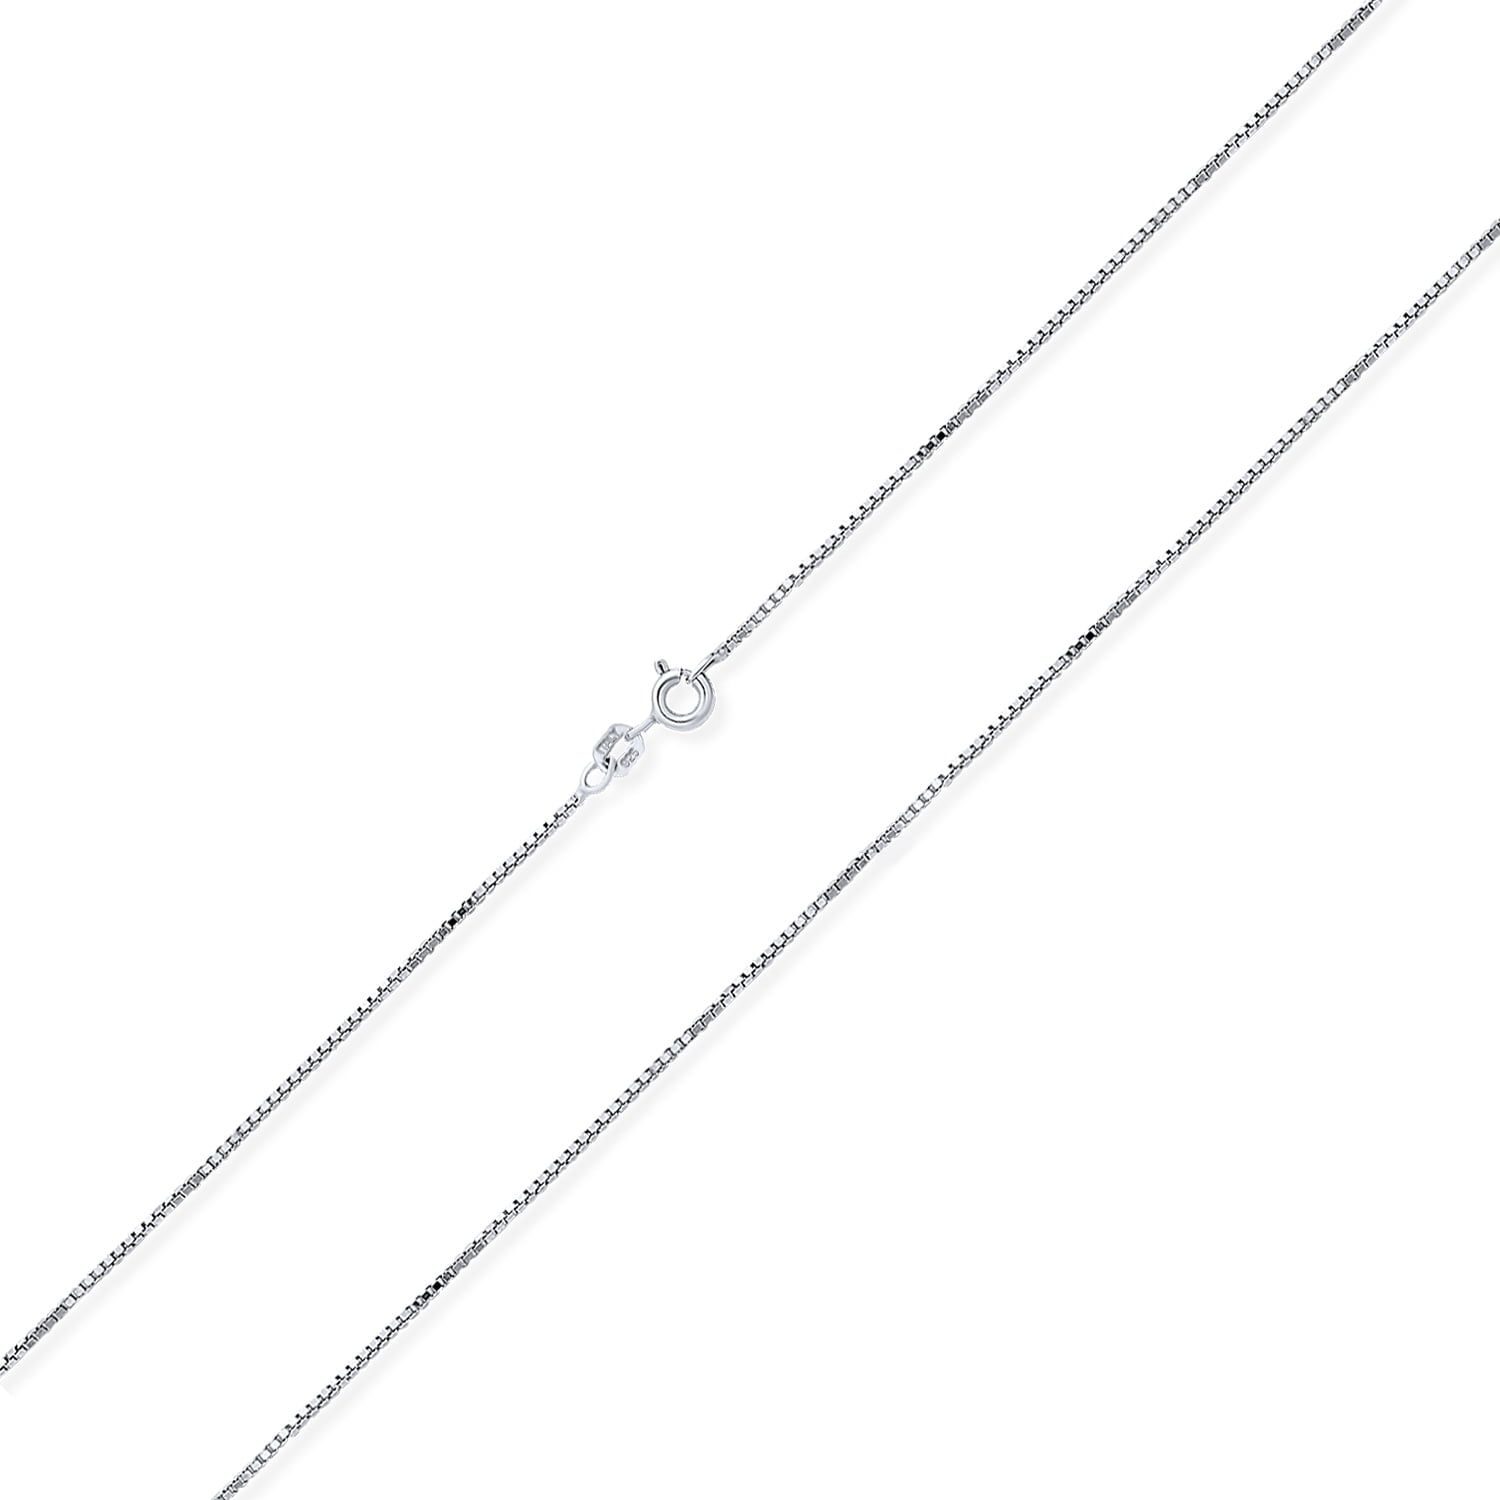 UK 16" TO 24'' INCH NECKLACE CHAIN BOX LINK MAN LADY 925 STERLING SILVER FILL